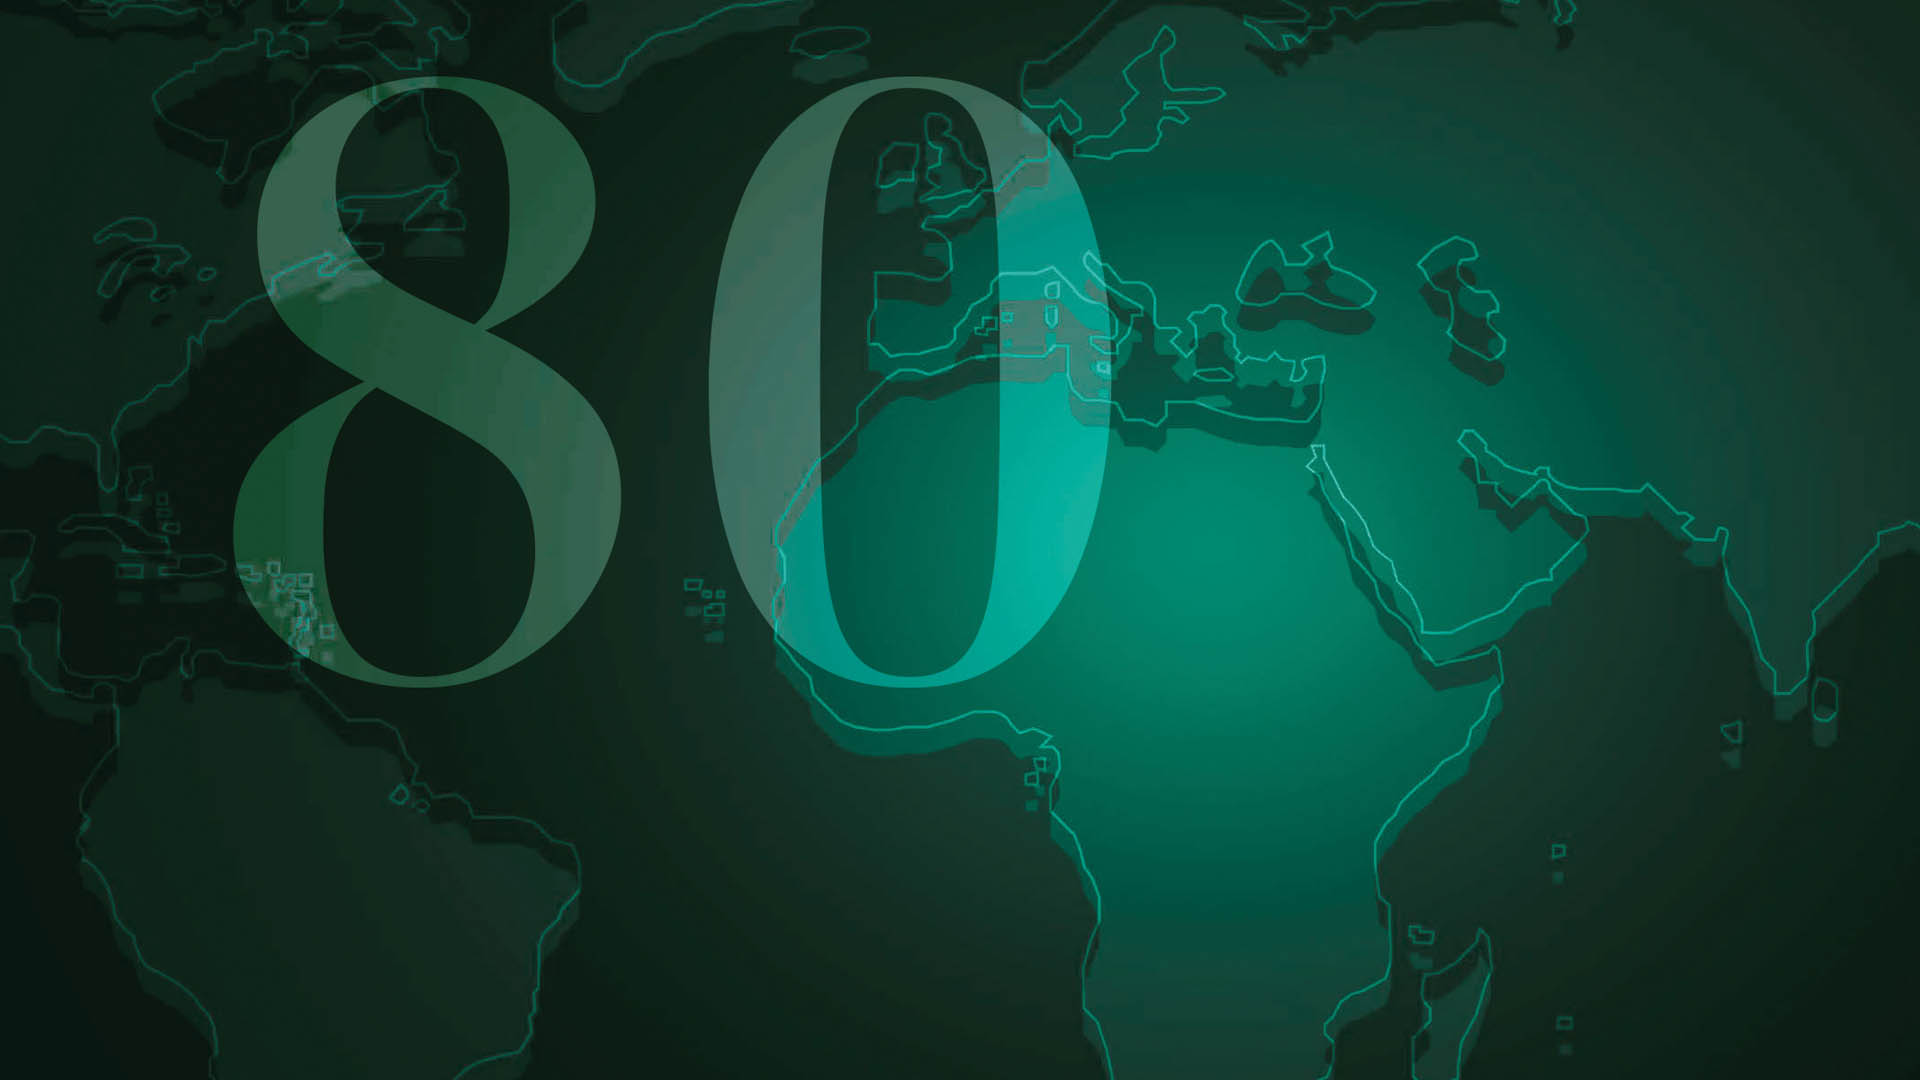 80+ years of legacy in providing Natural Gas Products and Solutions to the world